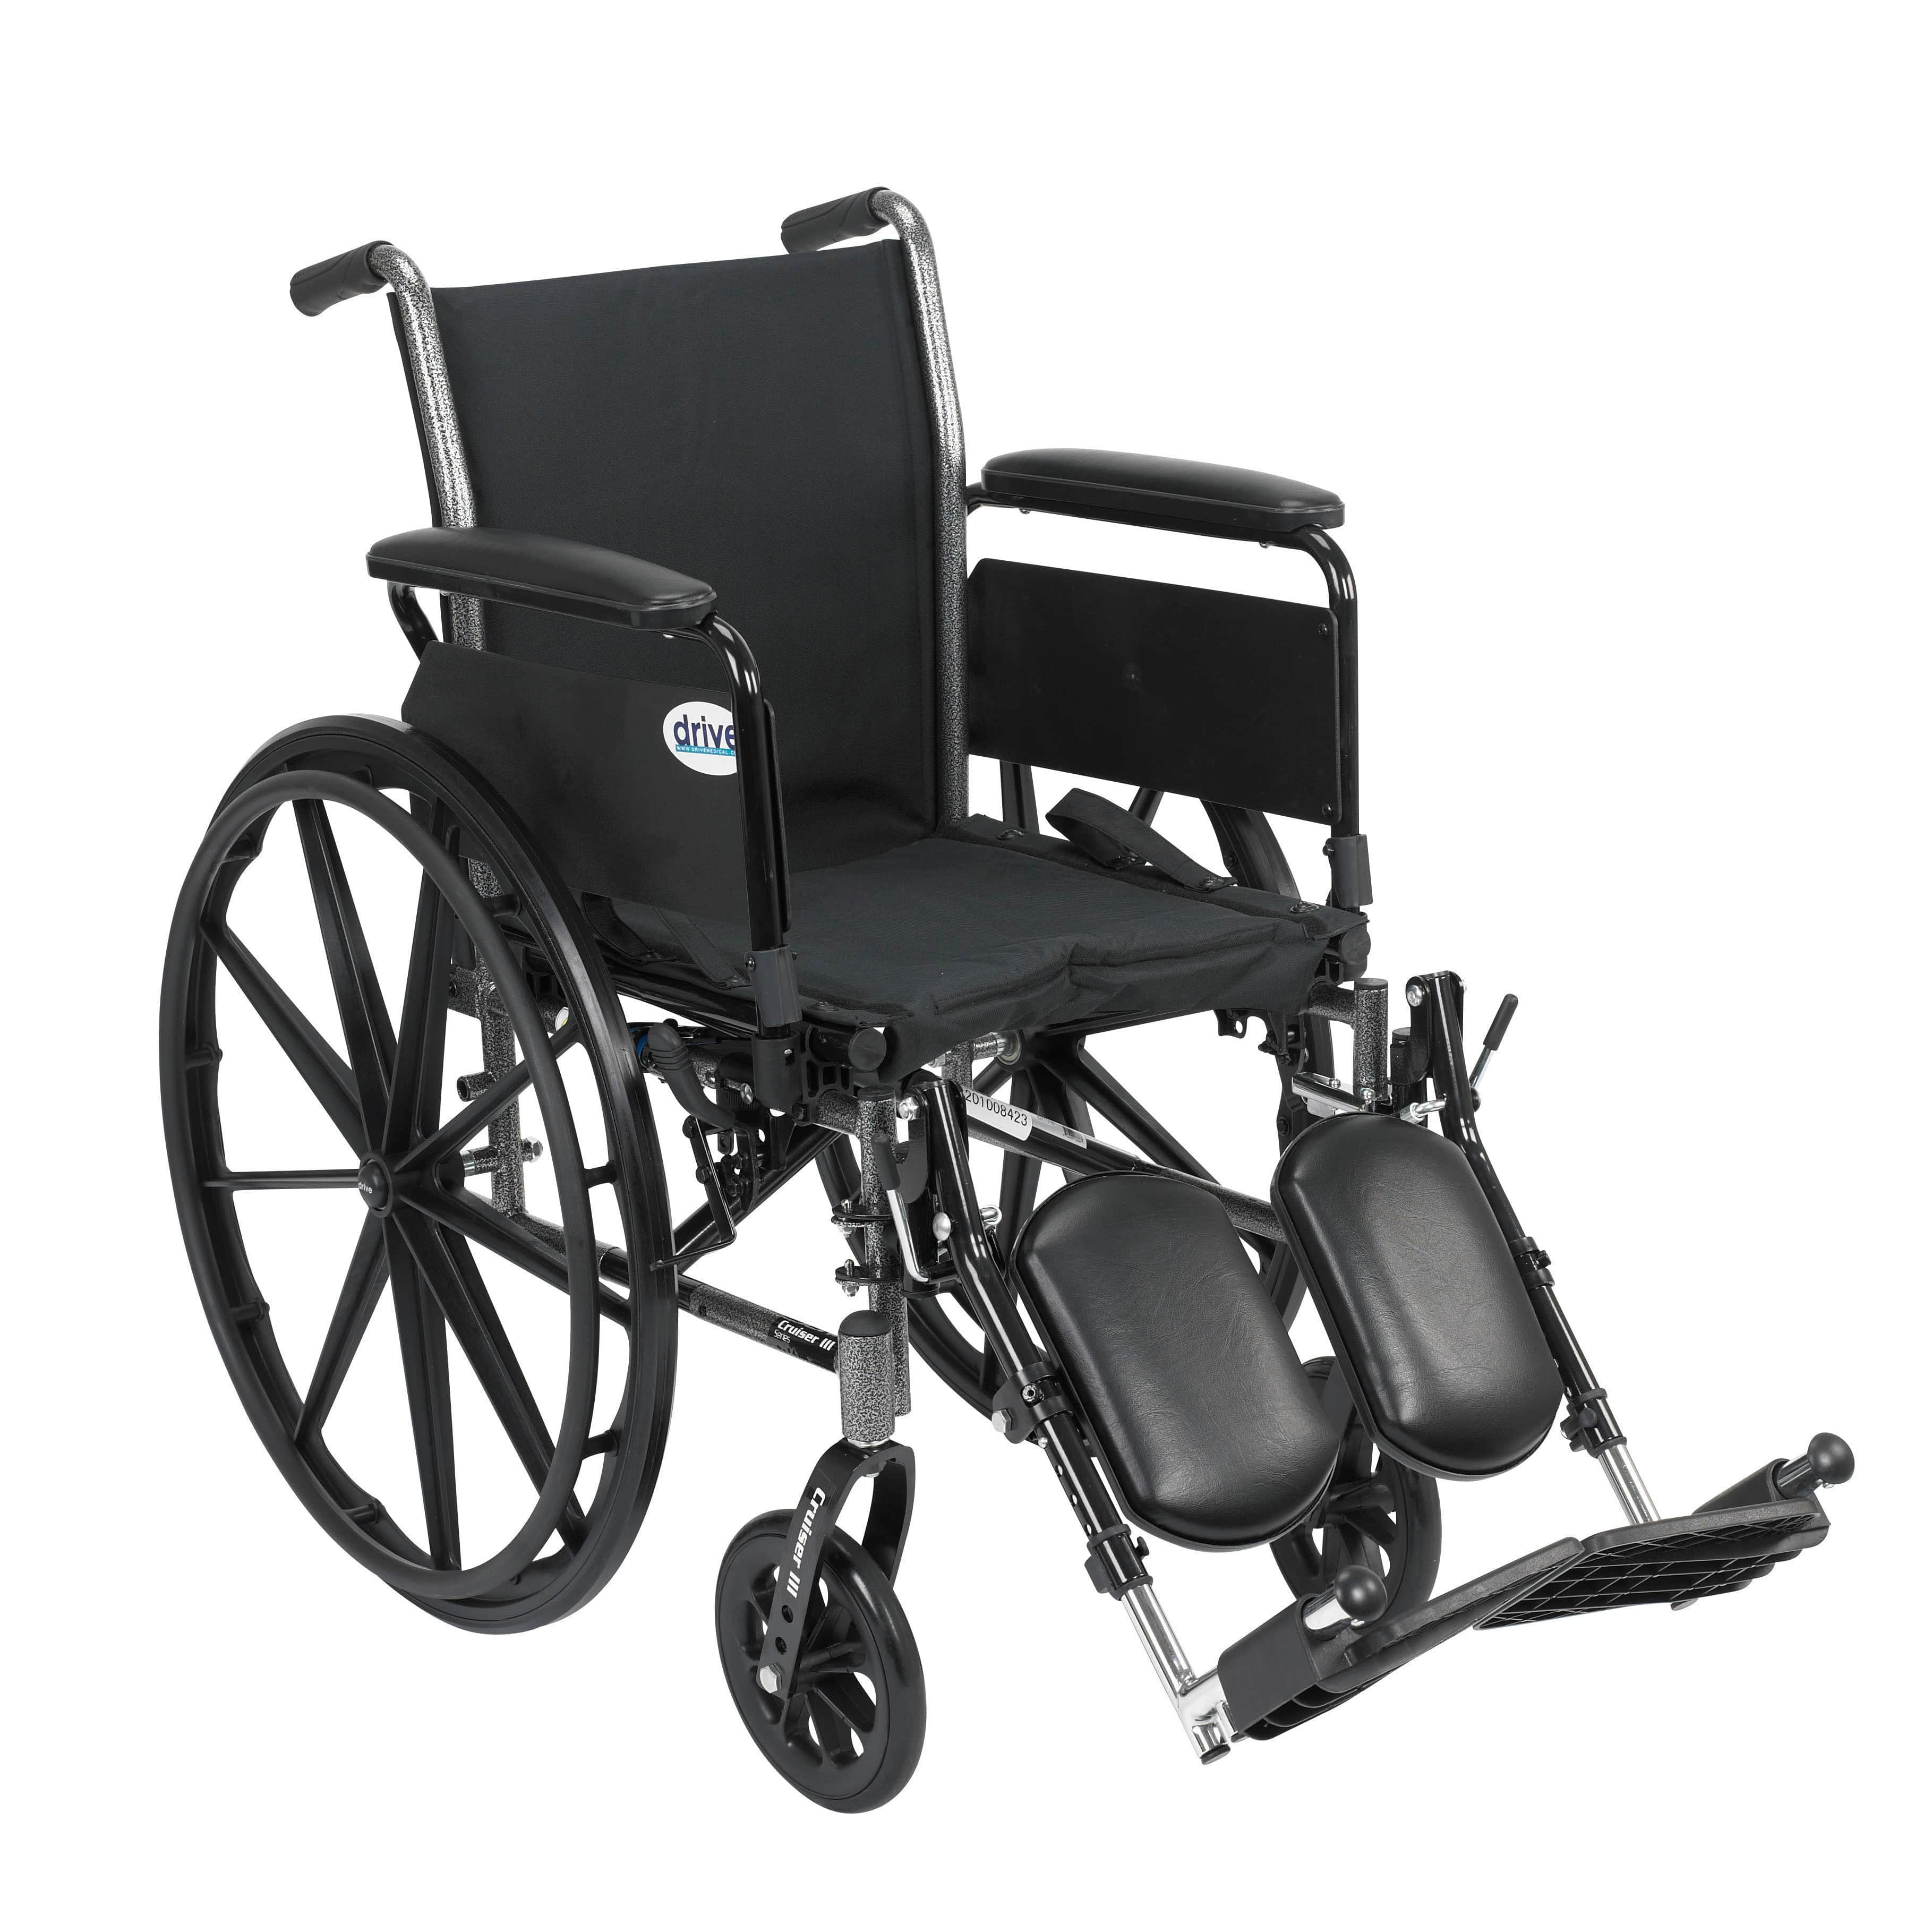 Drive Medical Wheelchairs Flip Back Removable Full Arms and Elevating Leg Rests / 18" Seat Drive Medical Cruiser III Light Weight Wheelchair with Flip Back Removable Arms